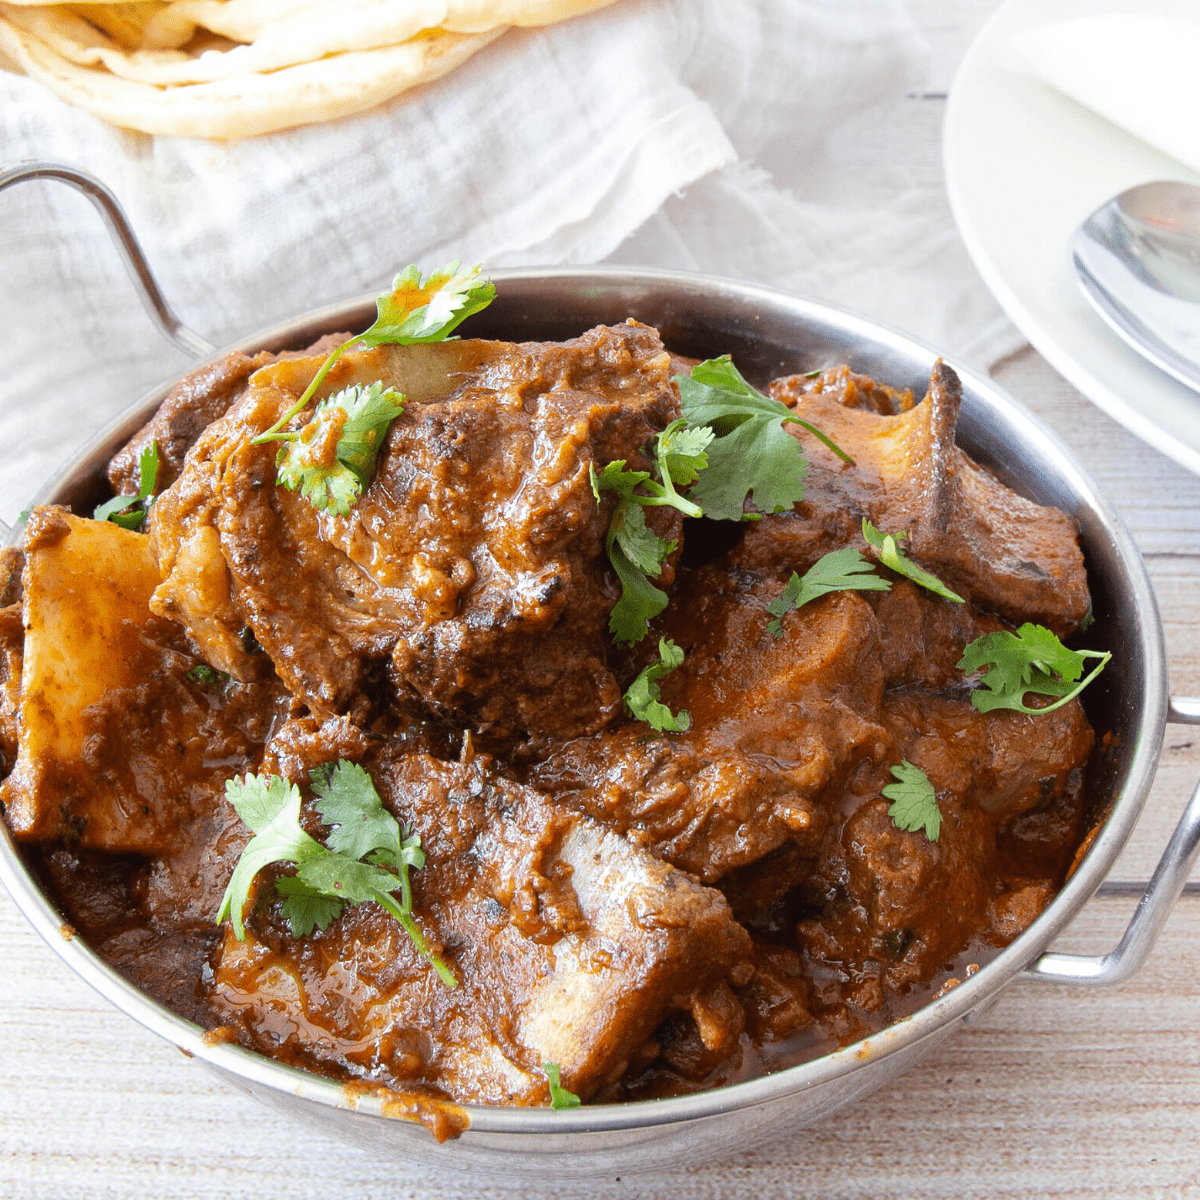 An Indian serving dish with lamb curry masala.